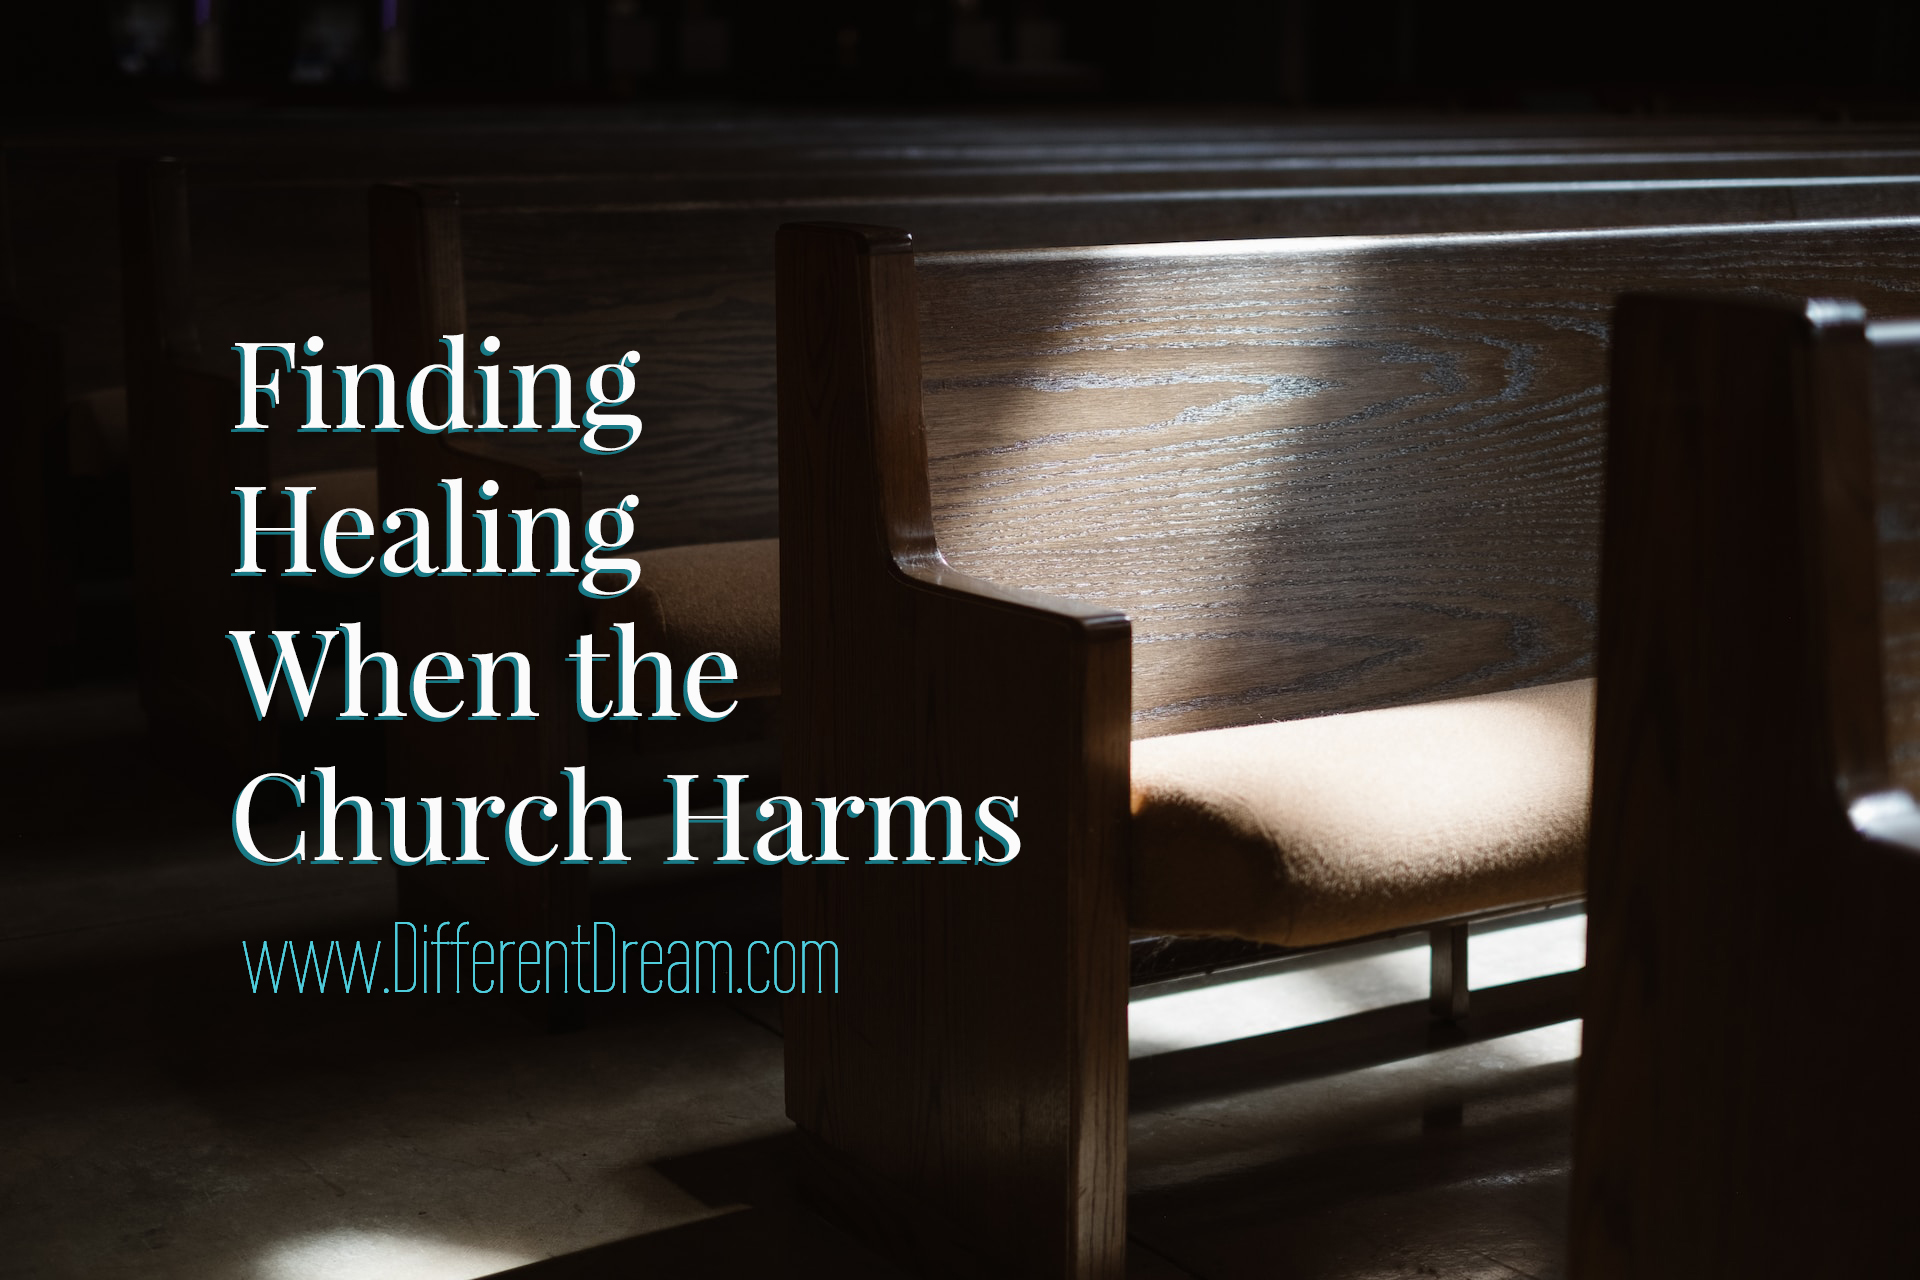 Guest blogger Kristin Faith Evans offers her suggestions of four ways disability families can heal after being hurt by a church.